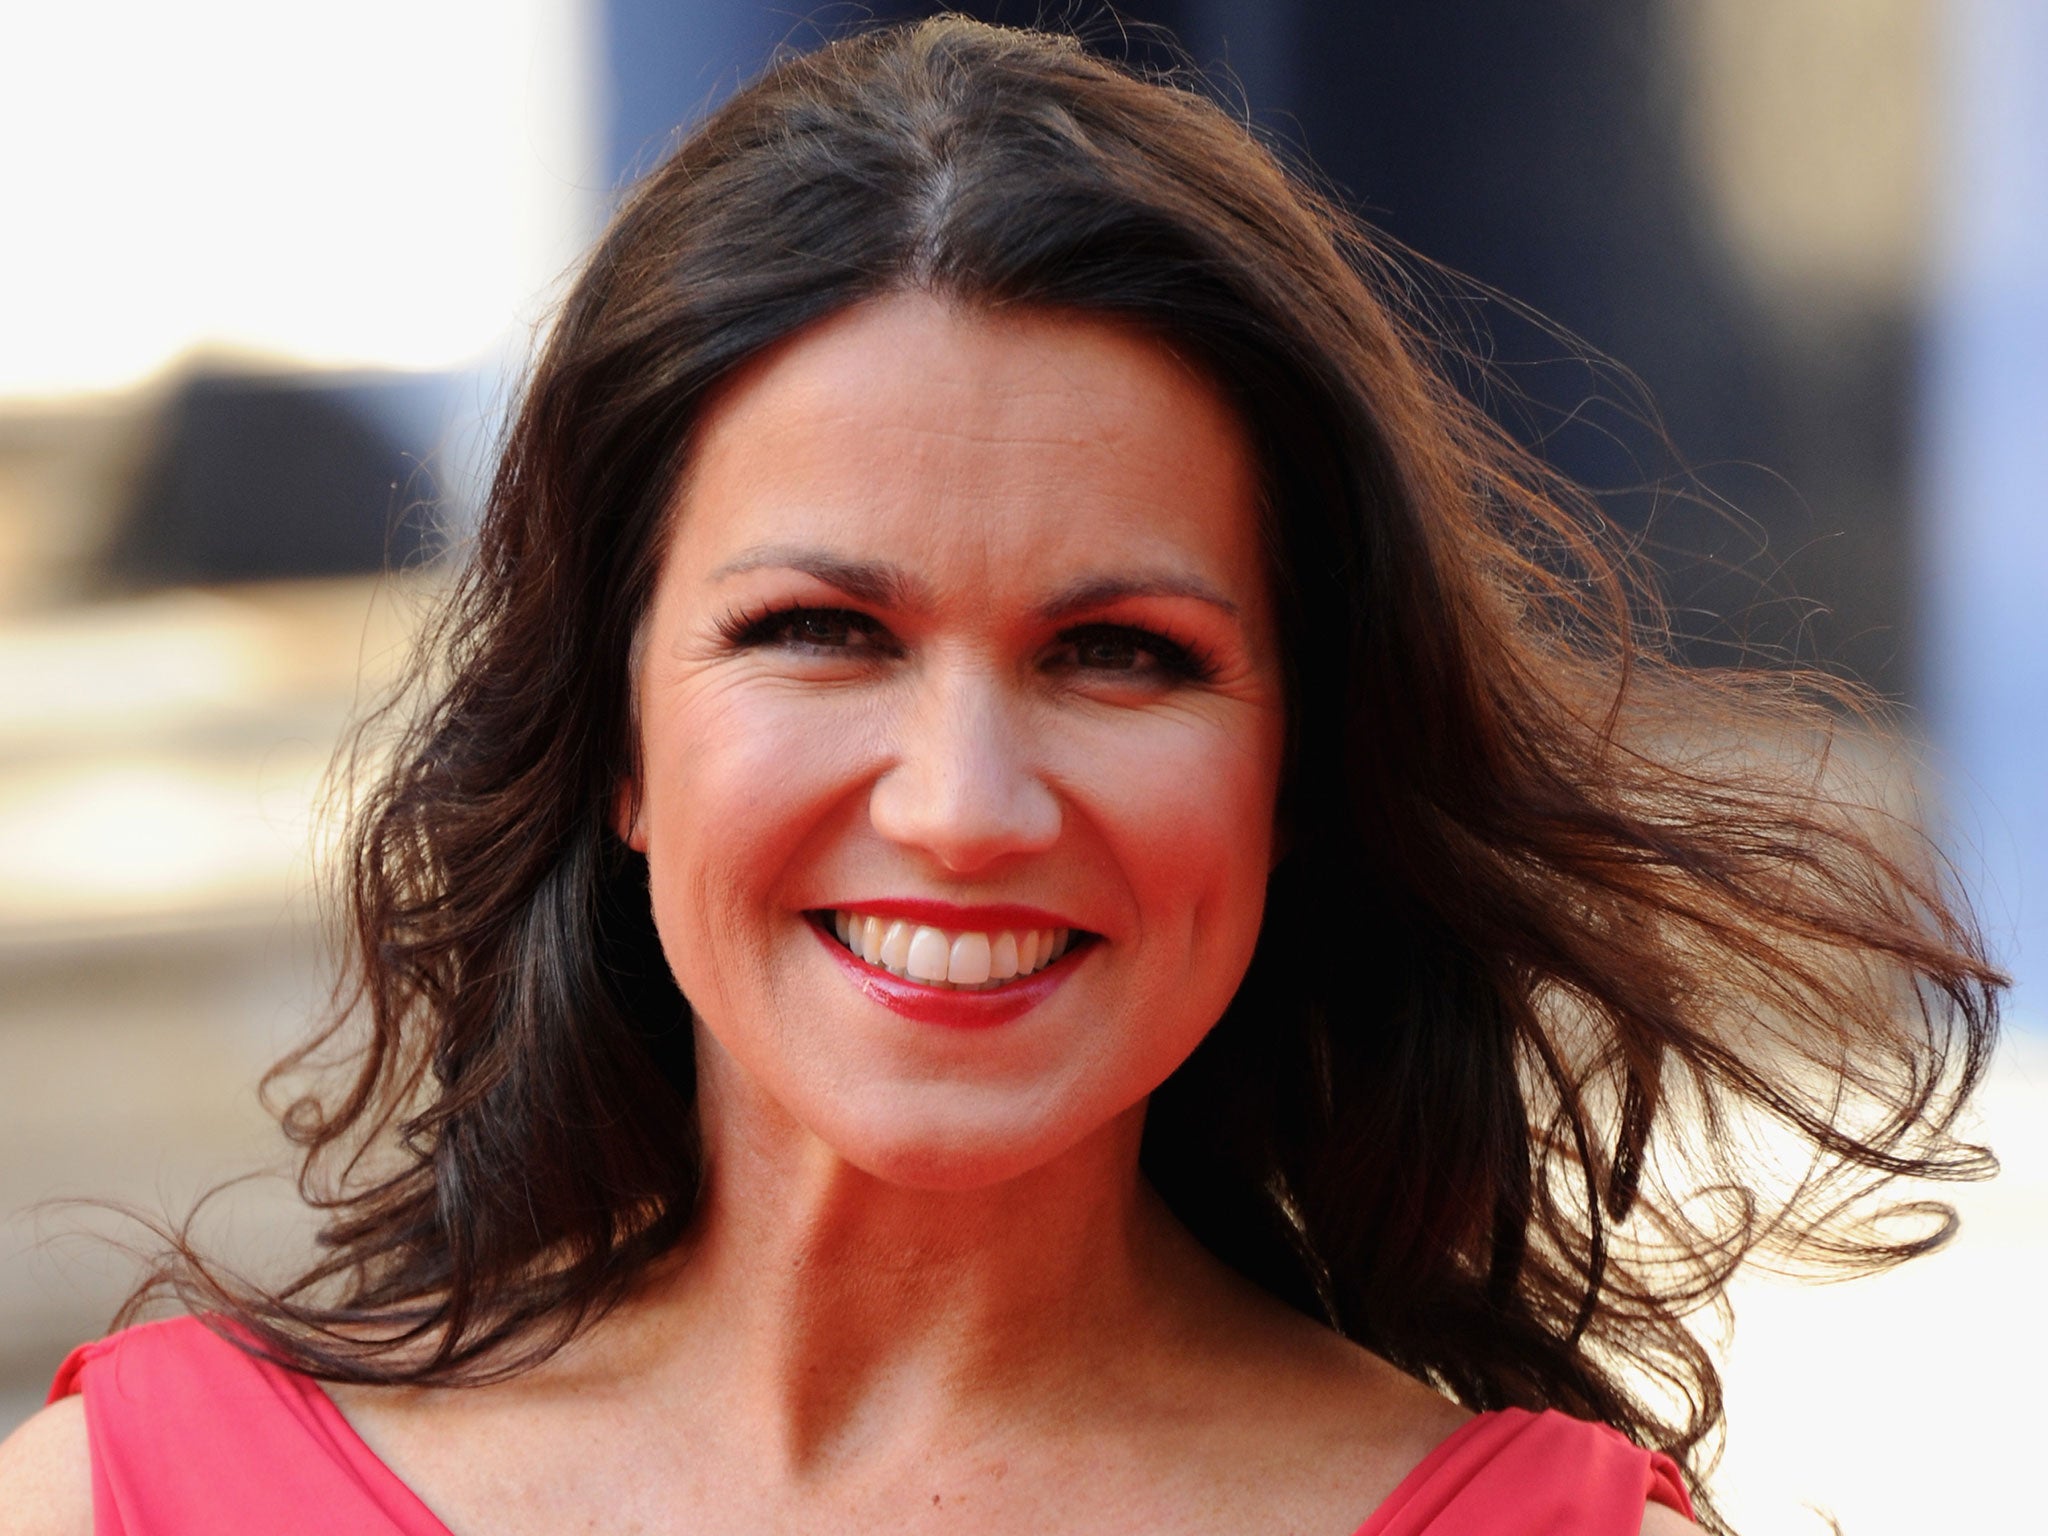 Susanna Reid has opened up for the first time about he breast cancer scare, writing in her column for The Sun